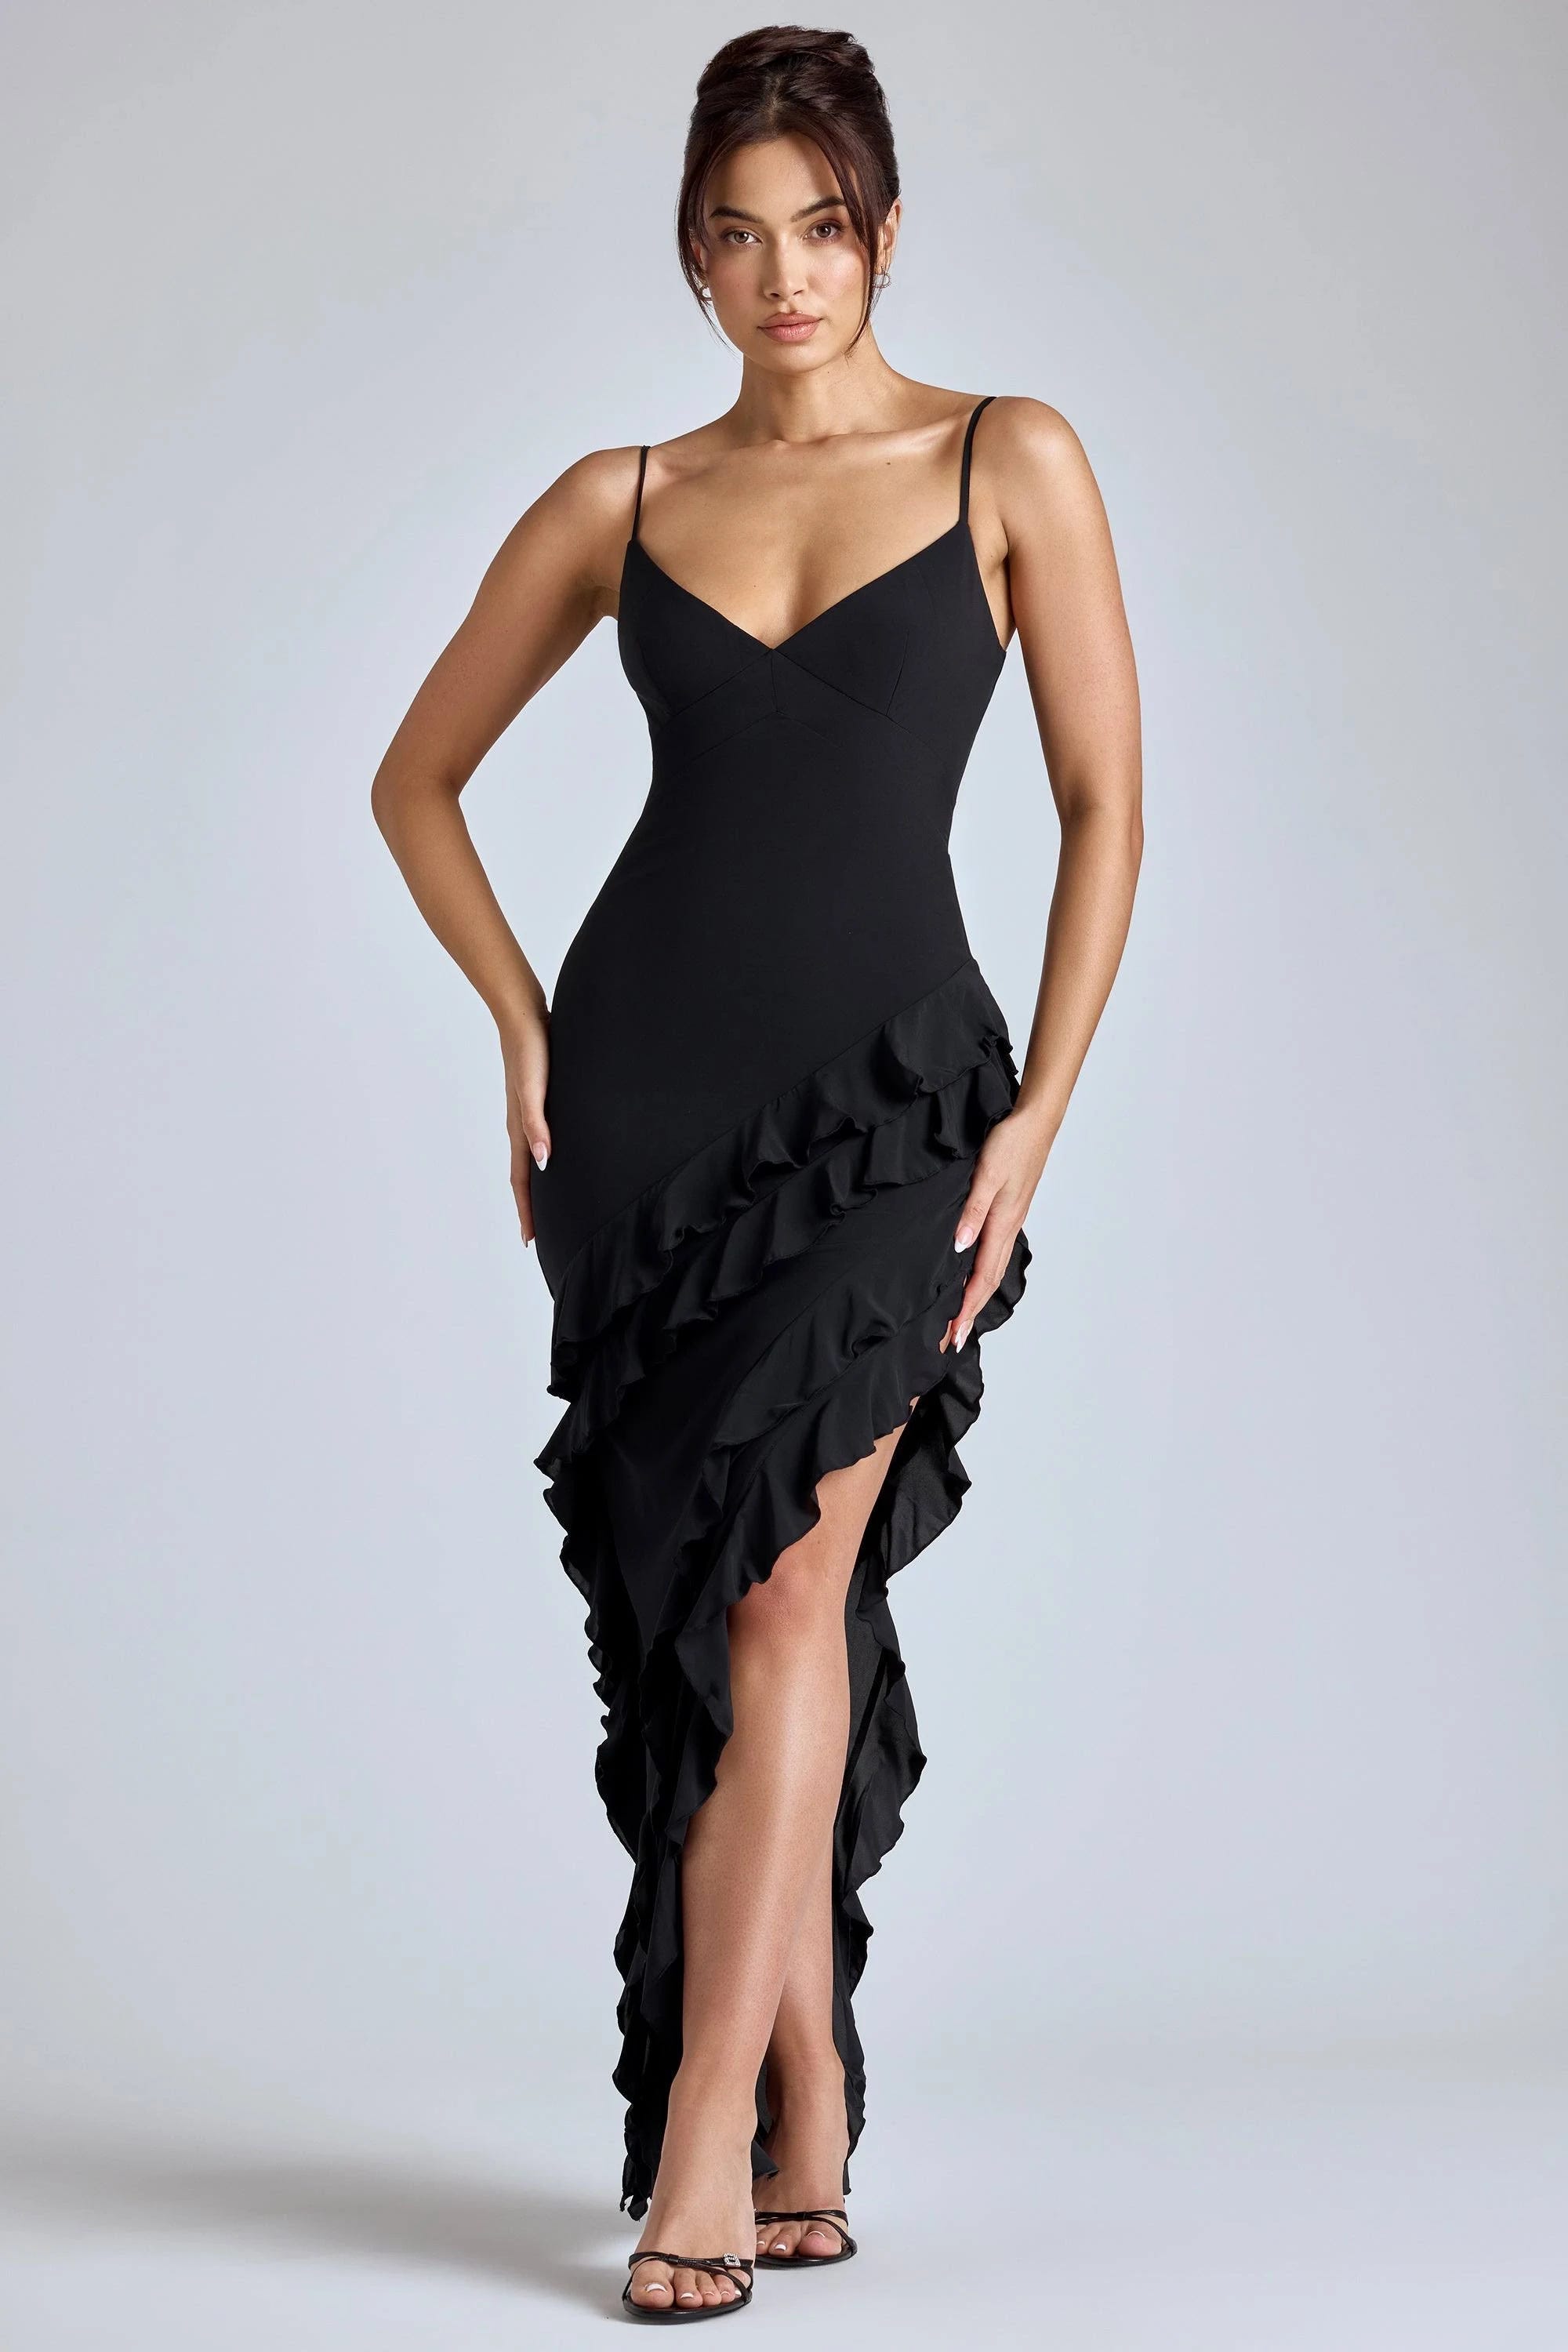 Stylish Black Evening Gown with Ruffle Detailing | Image